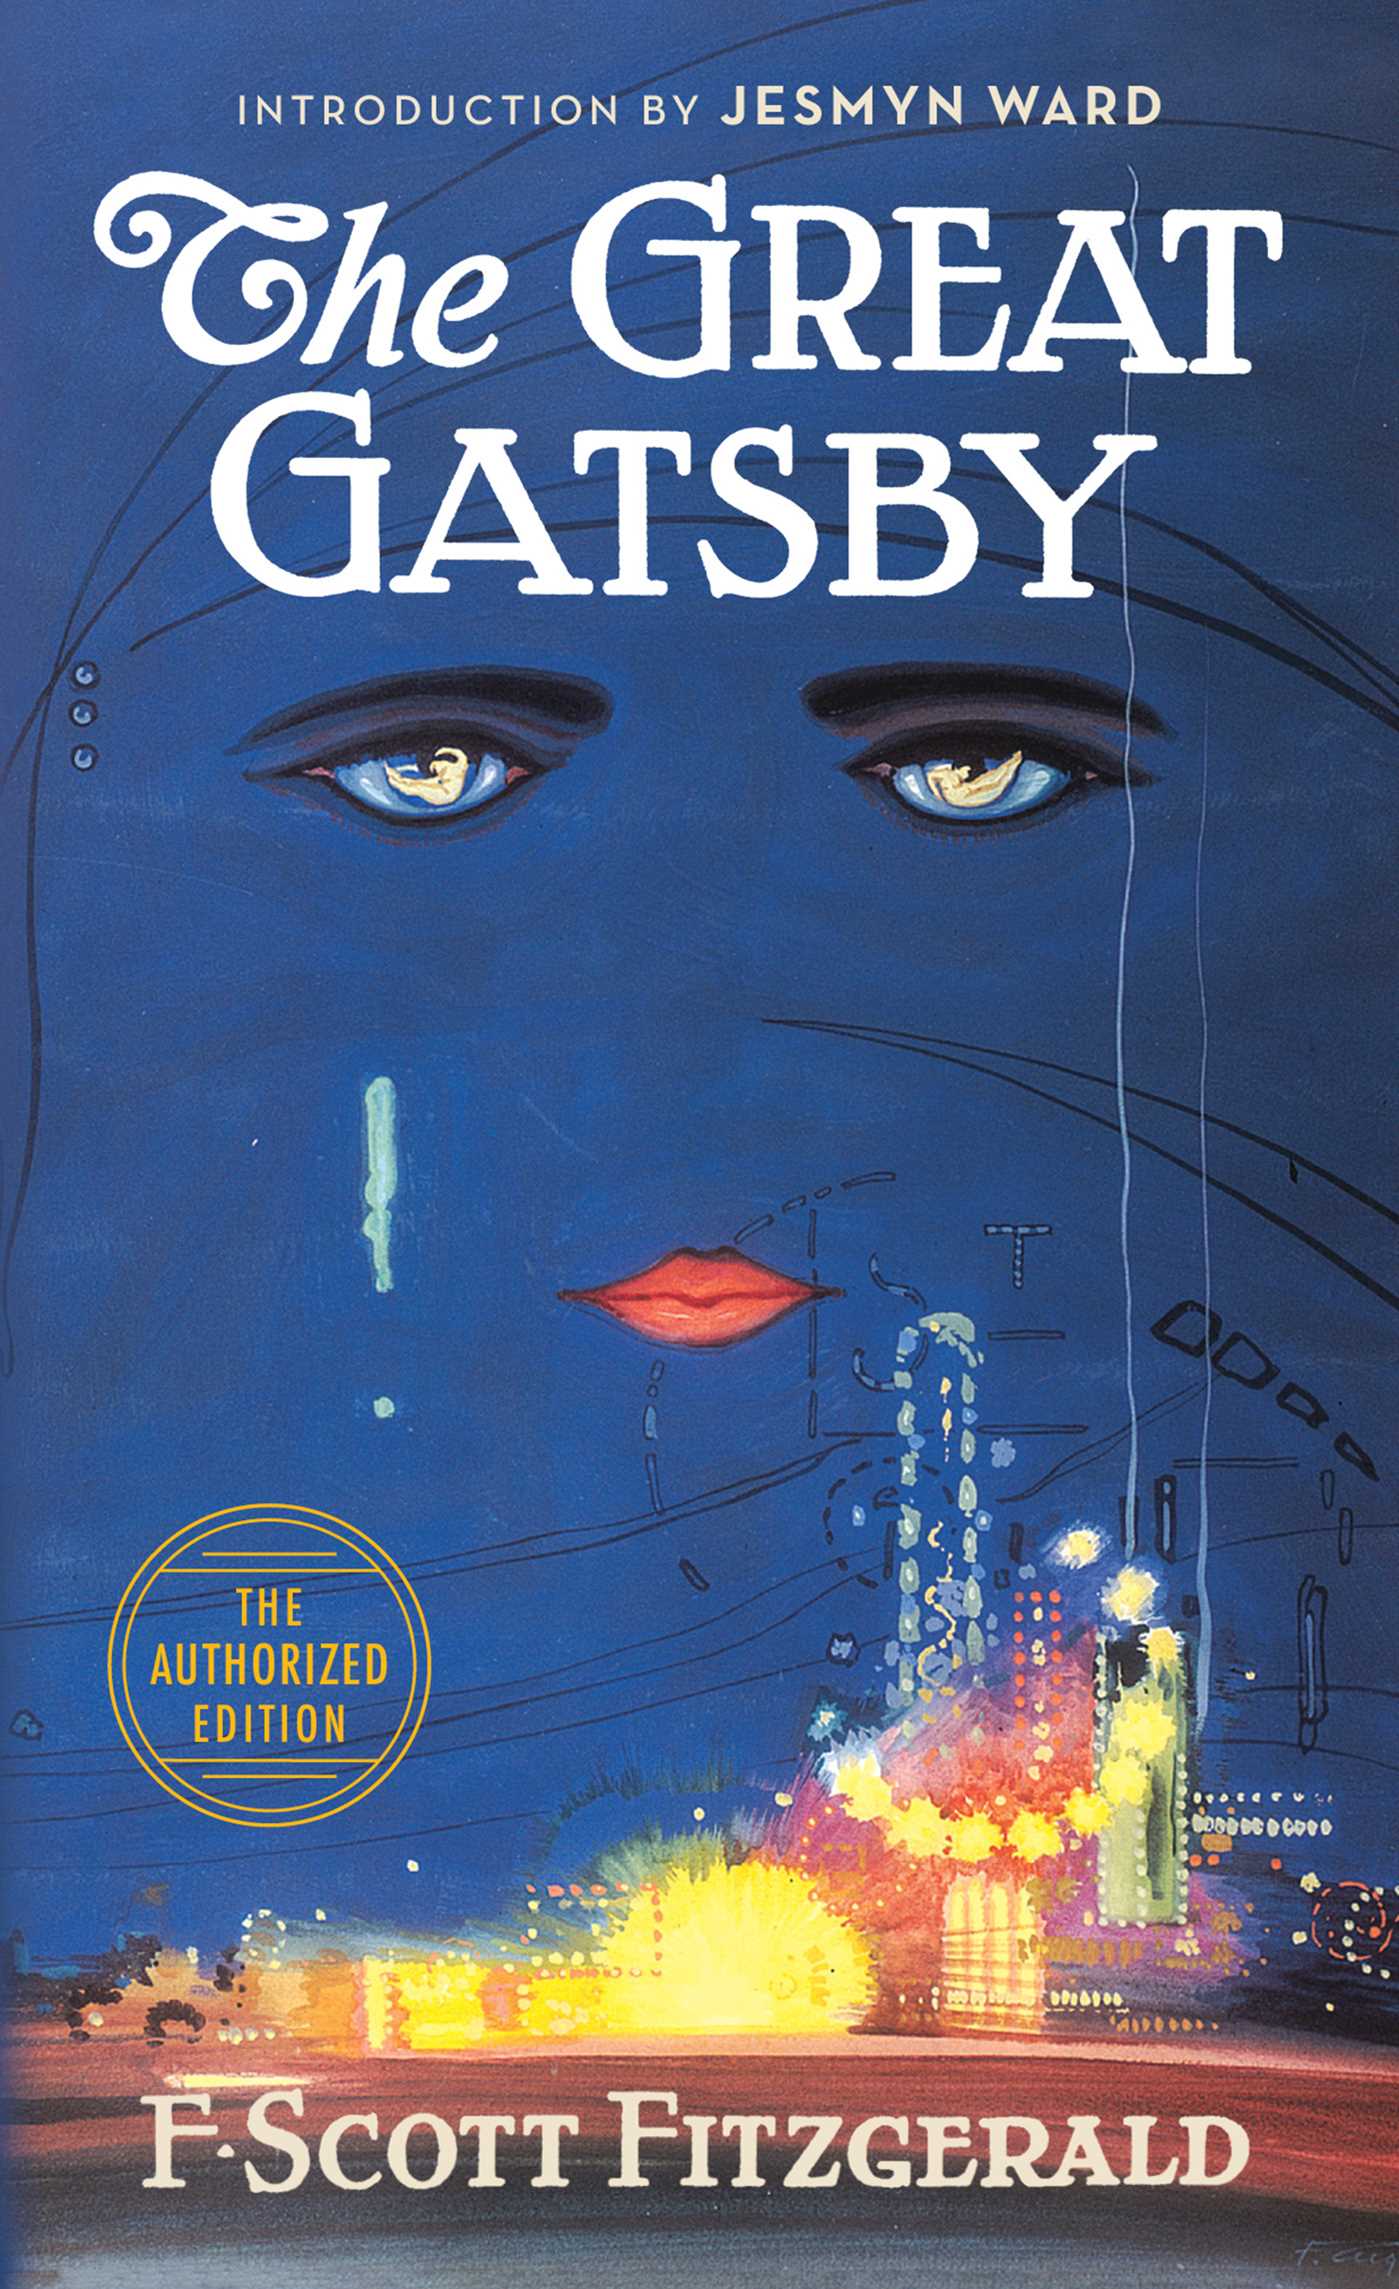 The Great Gatsby Published